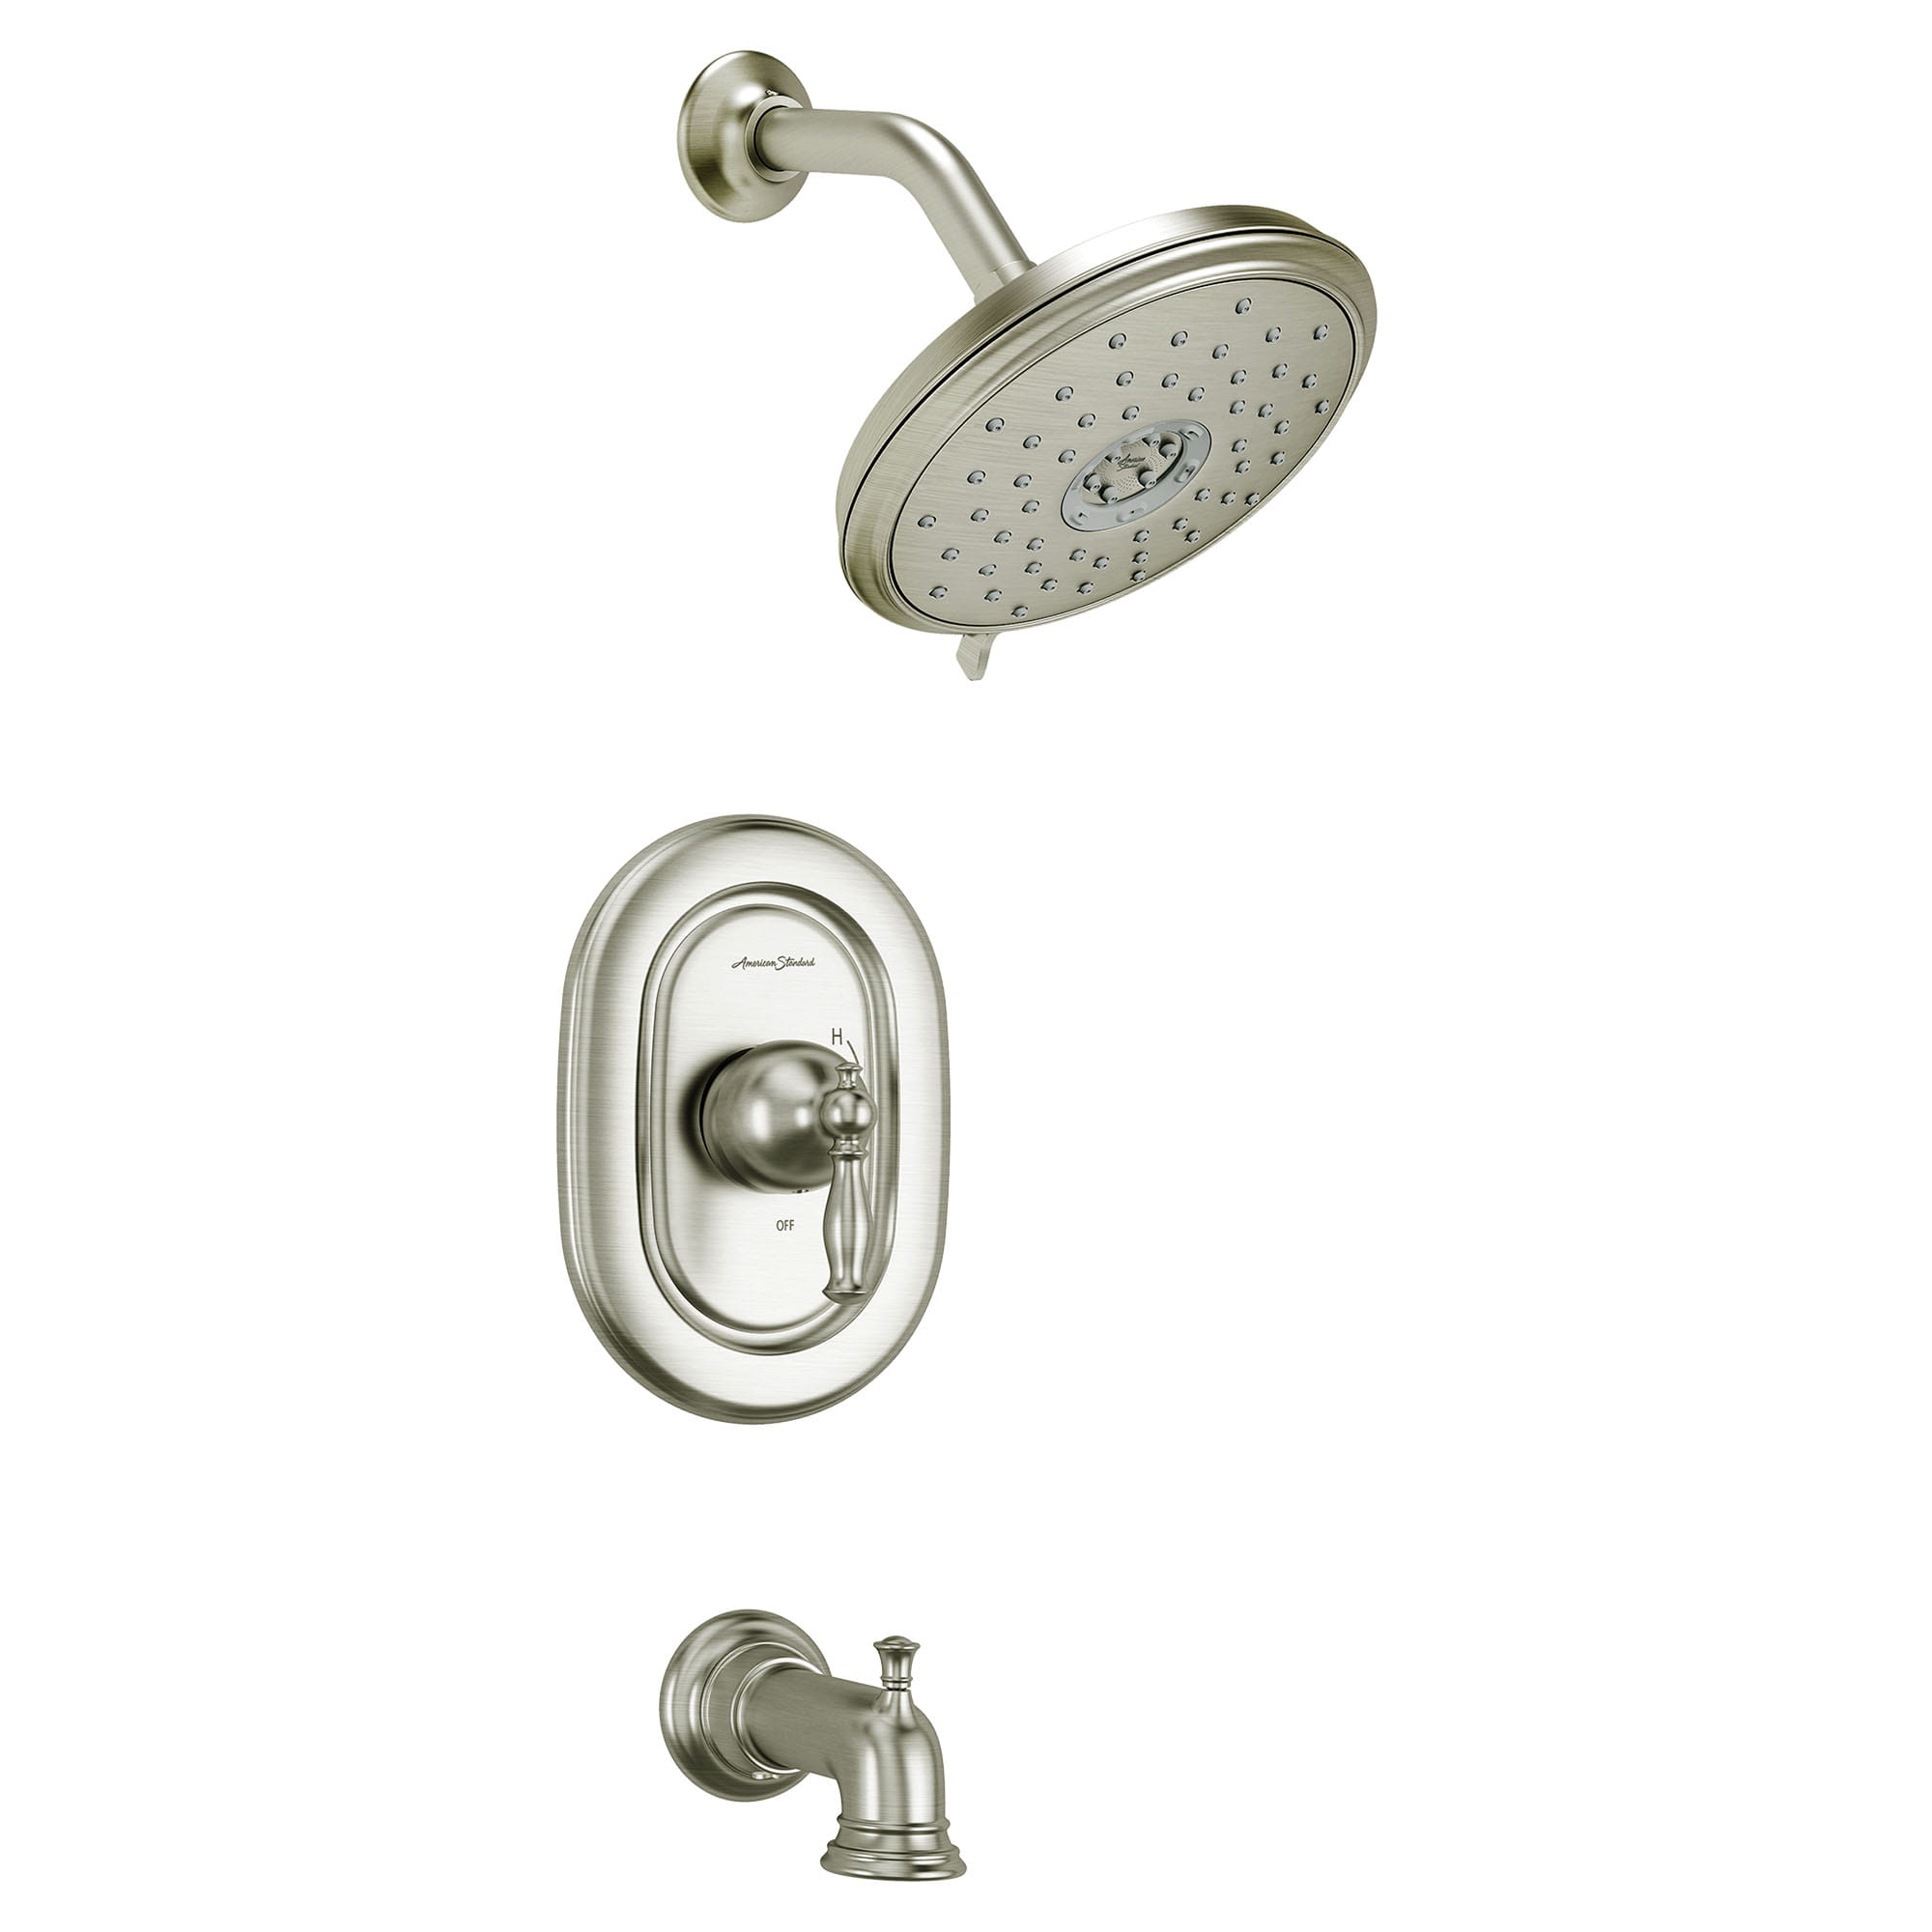 Quentin 18 gpm  68 L min Tub and Shower Trim Kit With Water Saving Showerhead Double Ceramic Pressure Balance Cartridge With Lever Handle   BRUSHED NICKEL